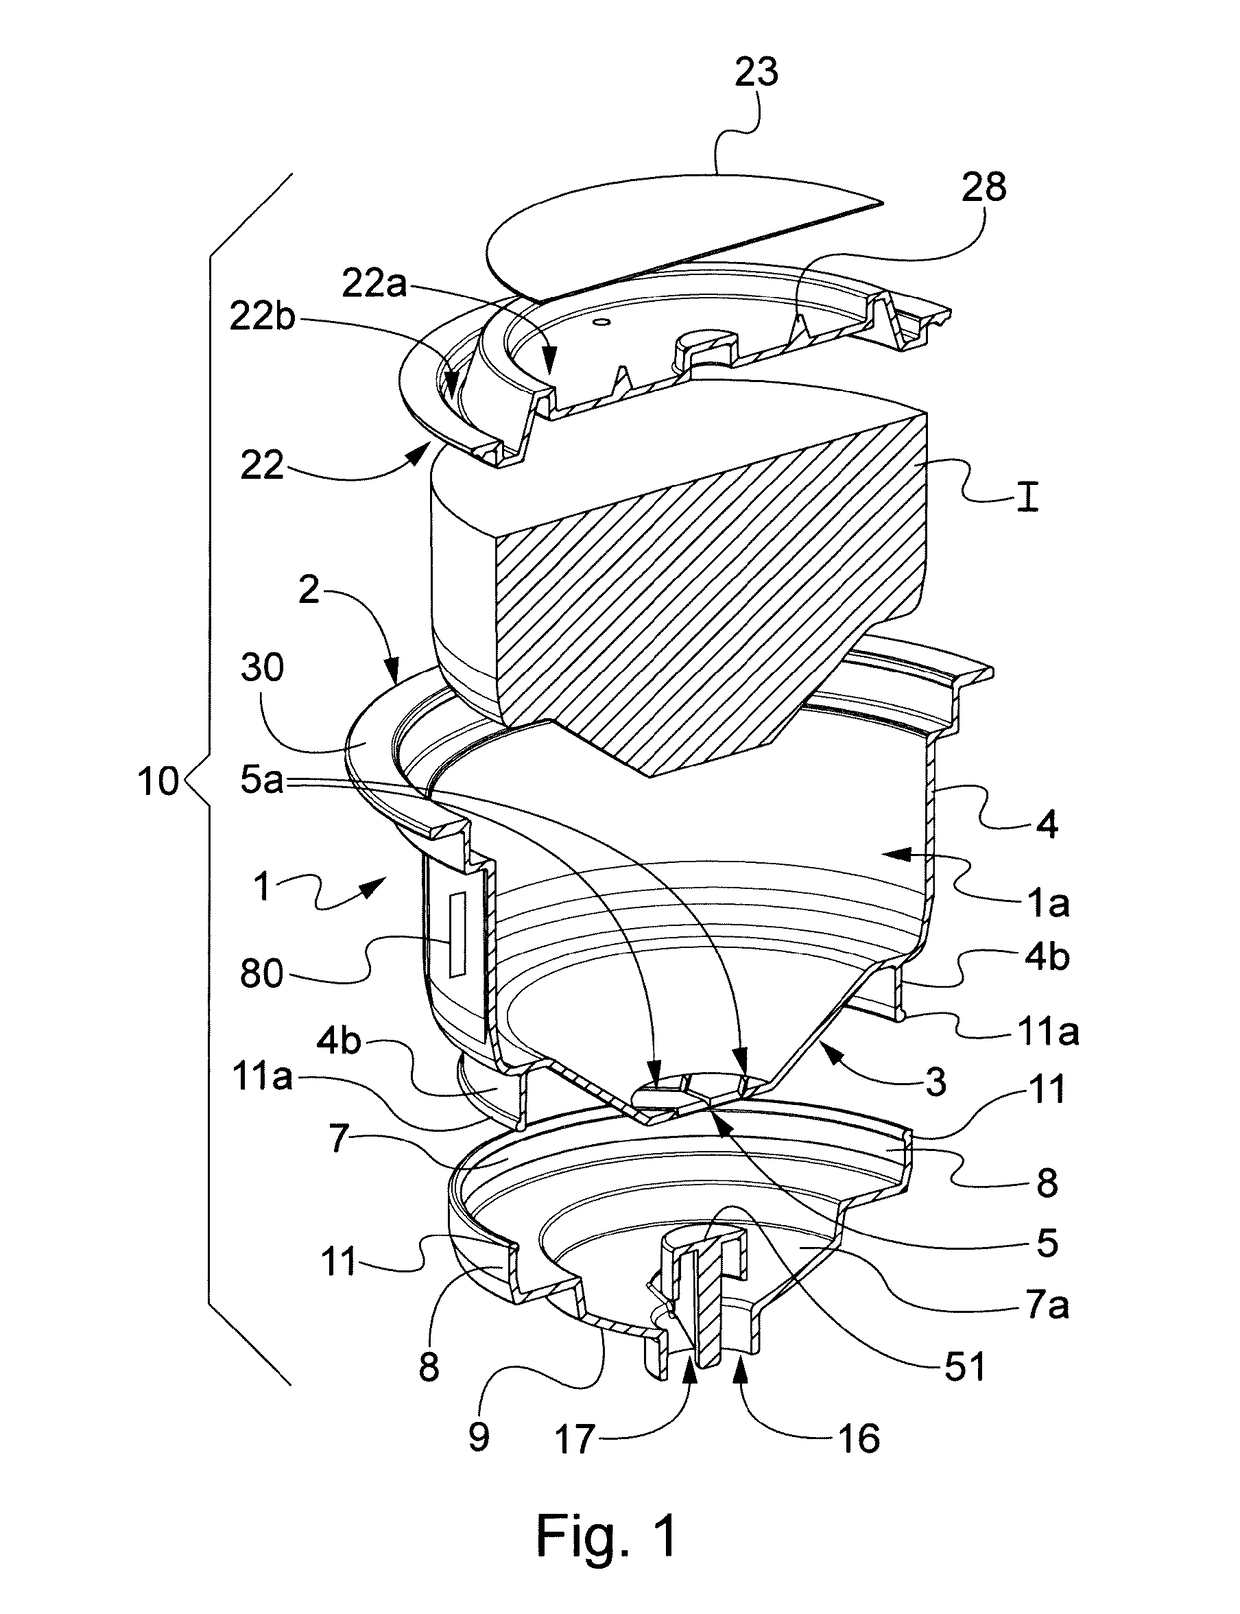 A capsule assembly comprising a capsule and a conveyor cap configured to open said capsule